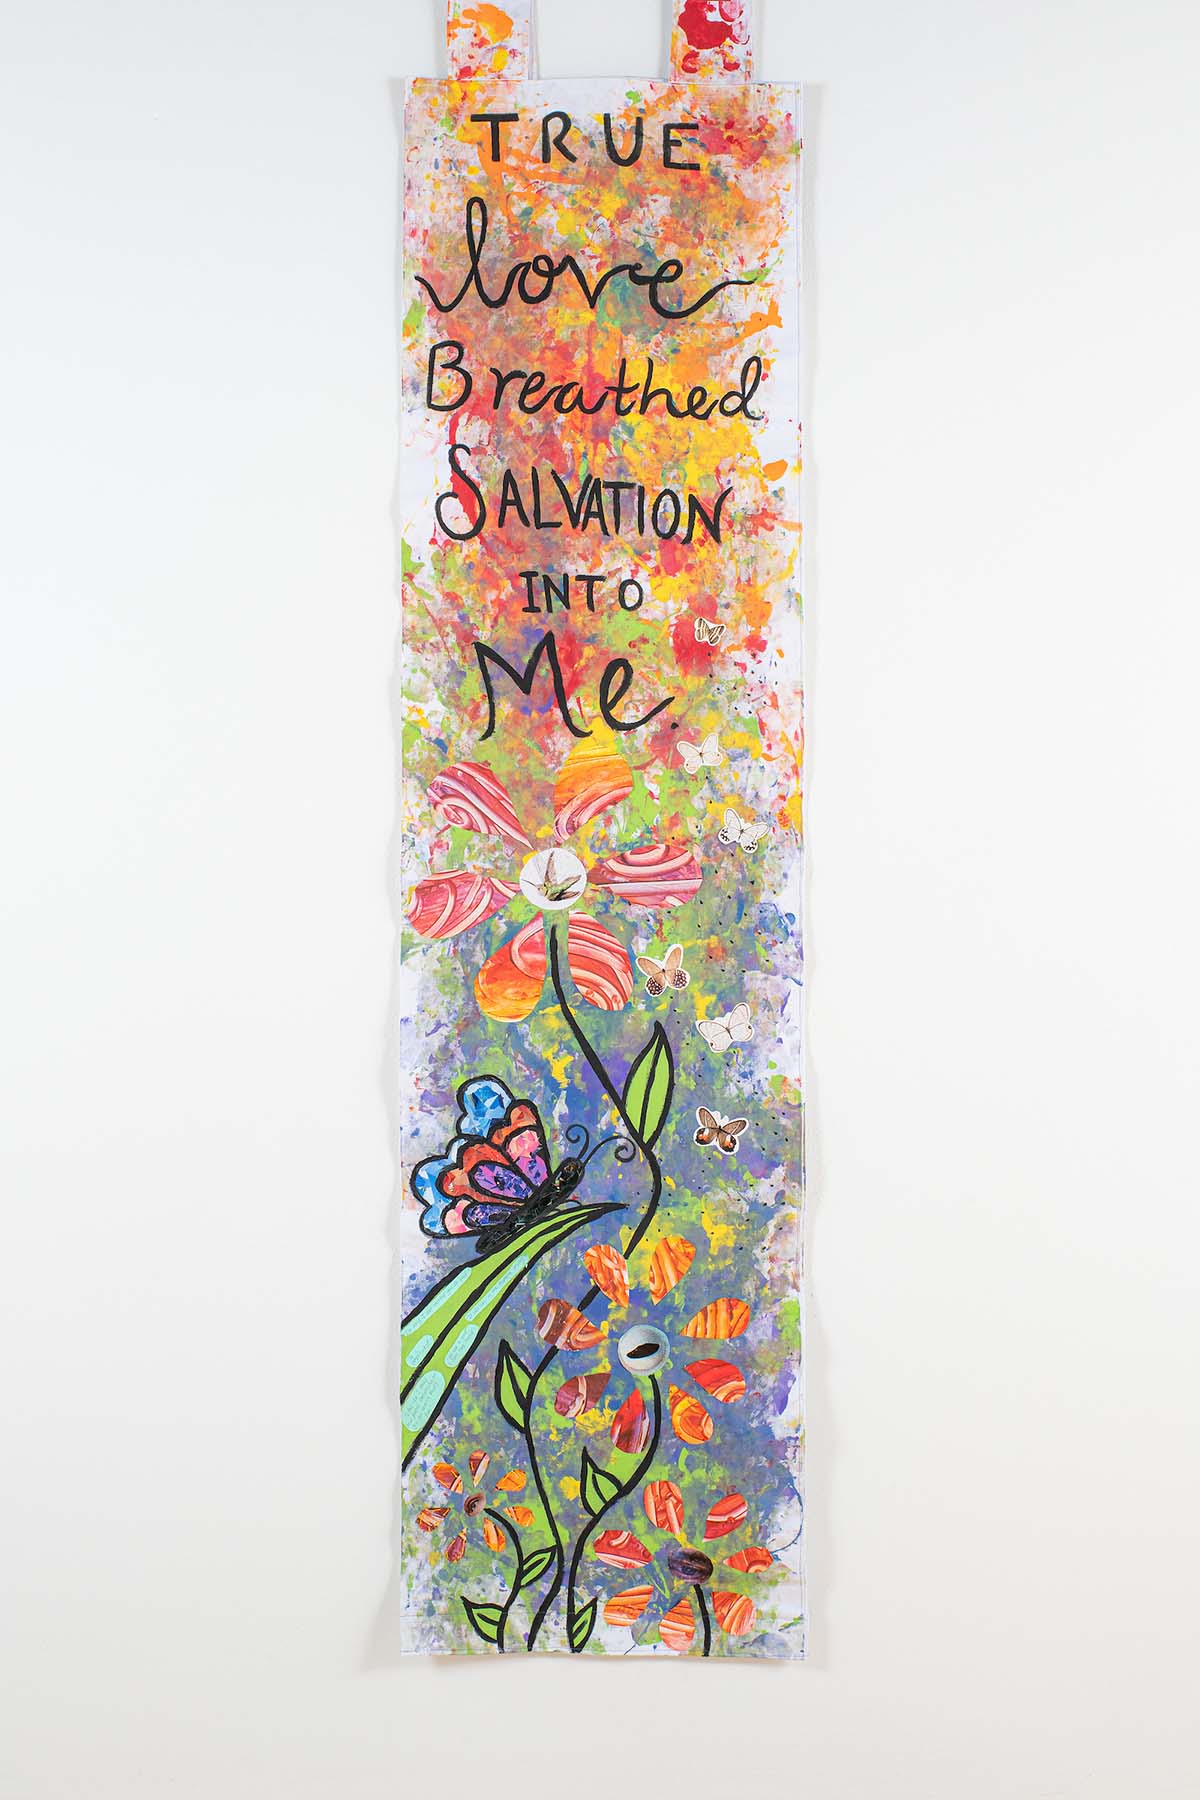 Photo of a colorful mixed media art piece that reads, 'True love Breathed SALVATION INTO Me' above a flower with a butterfly on a blade of grass